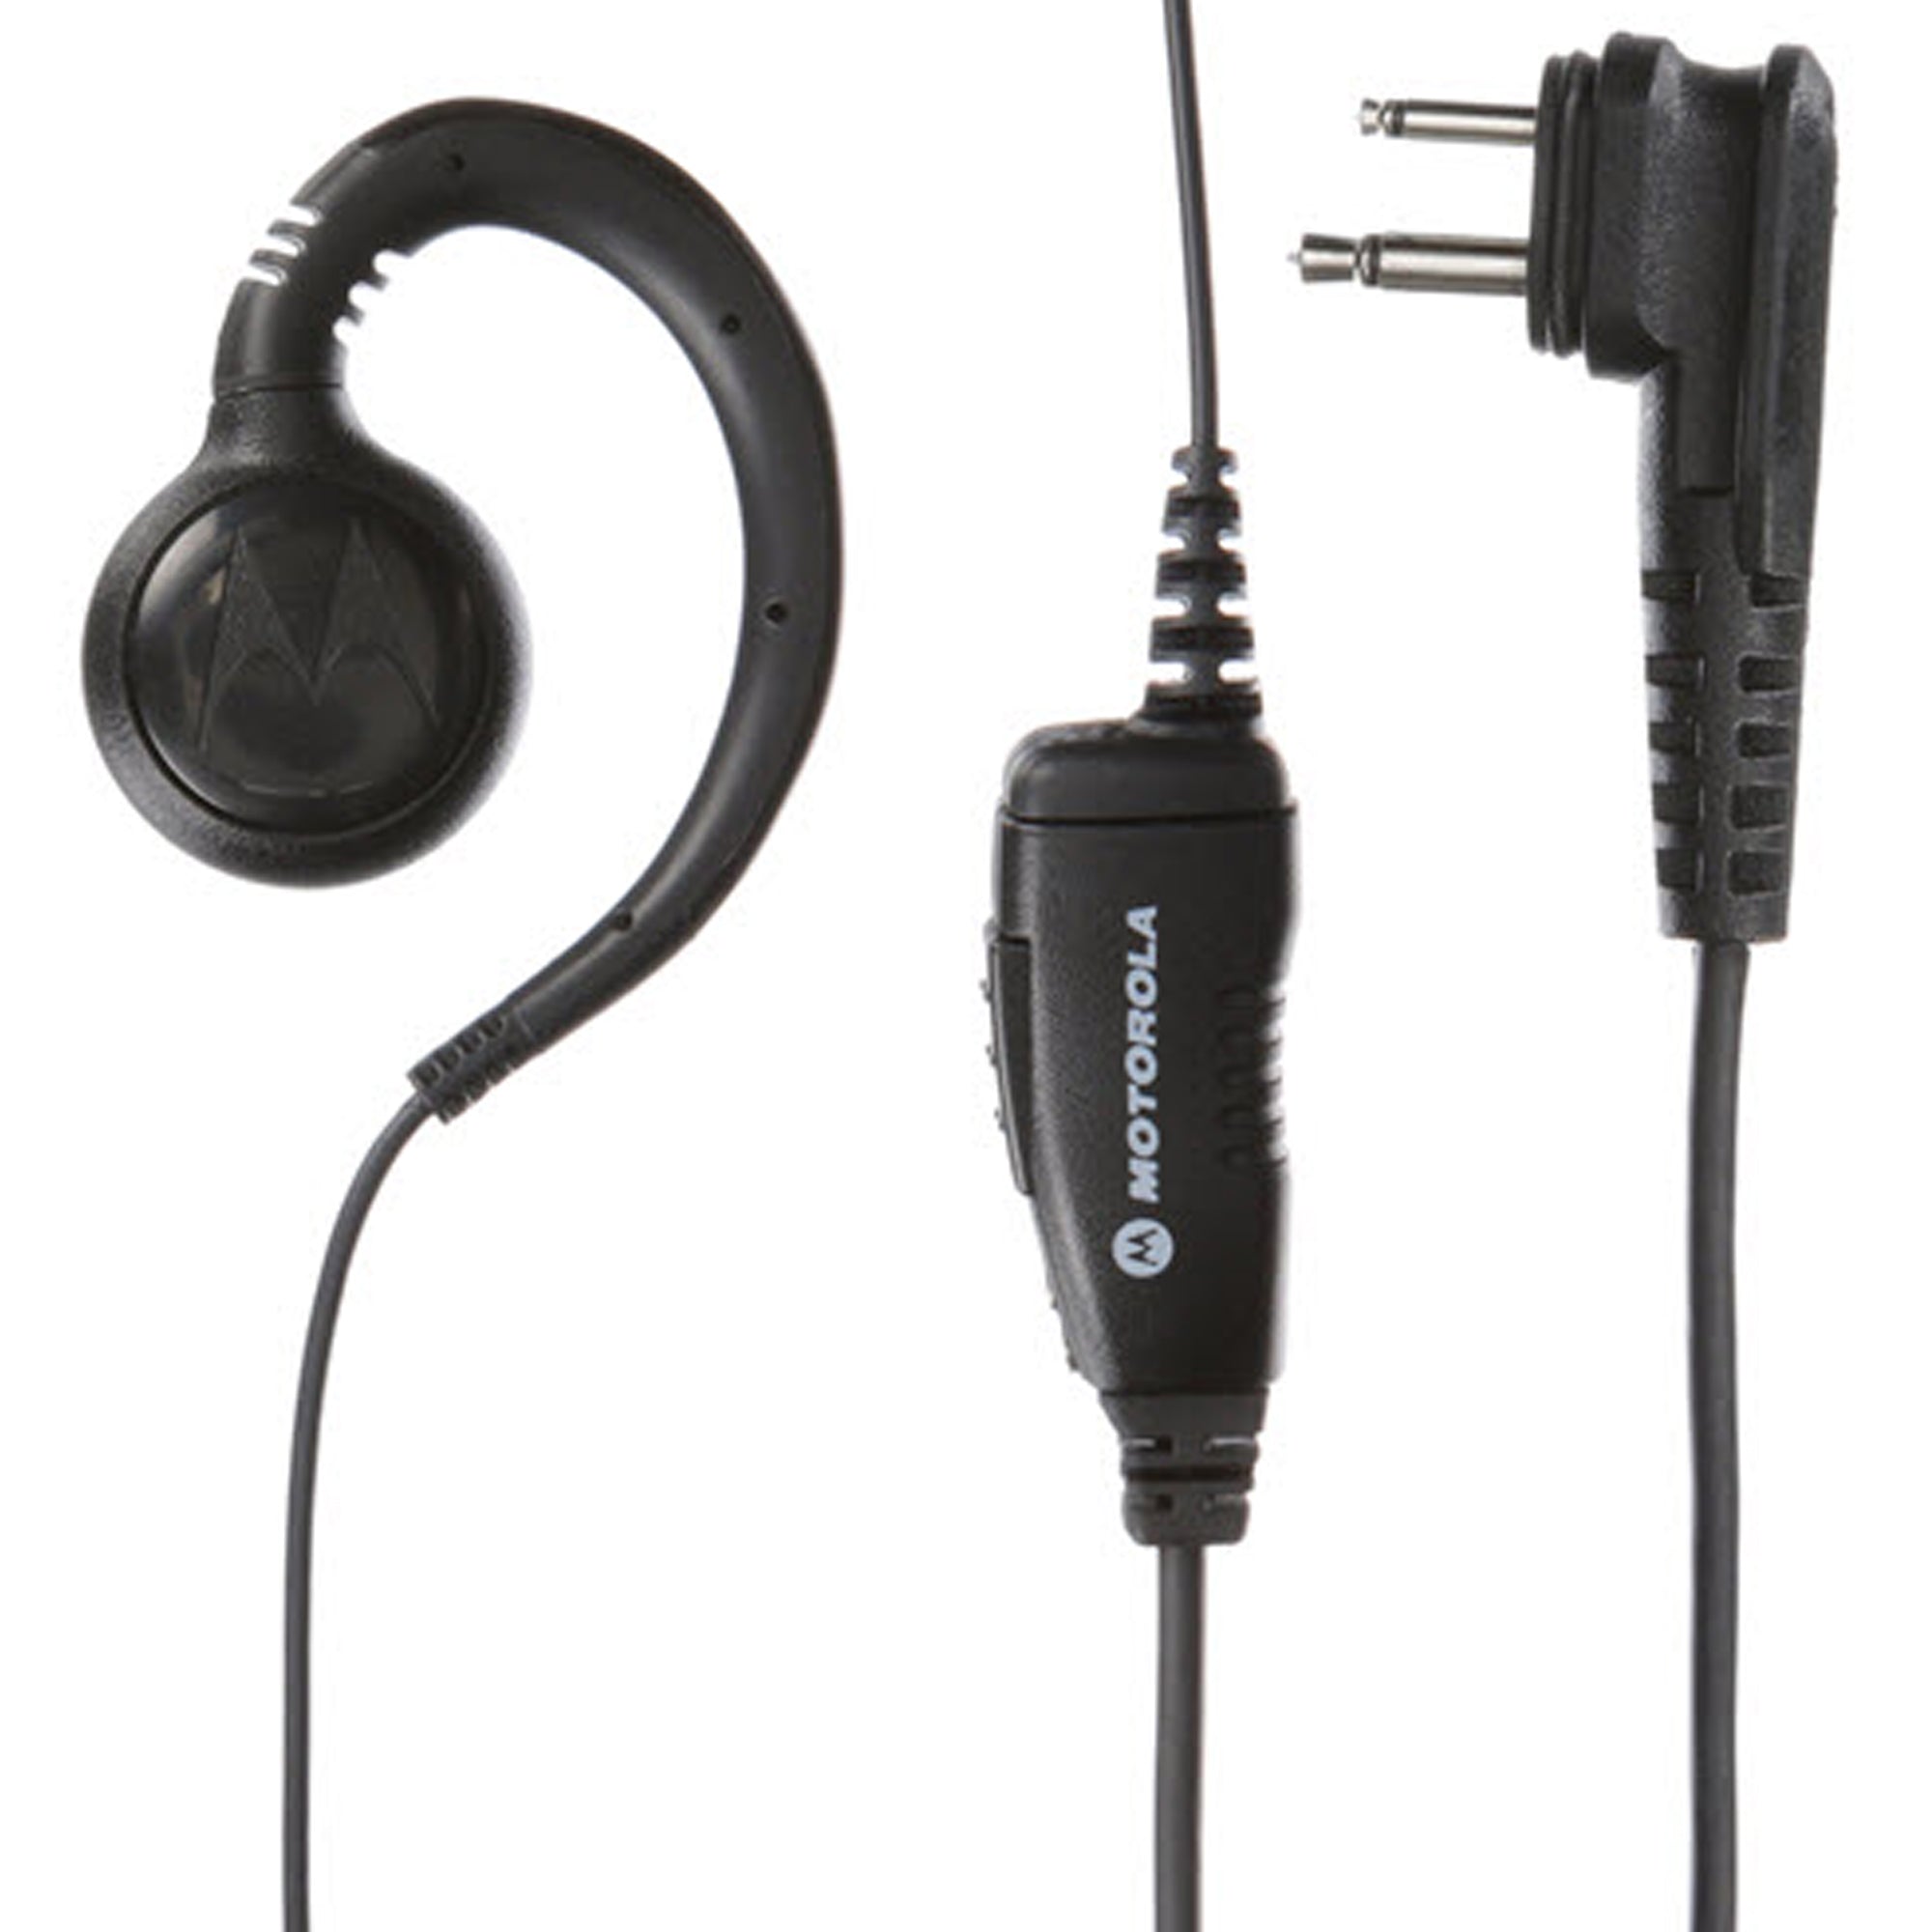 Motorola RMU2080D 12 pack with Multi Unit Chargers and Headsets